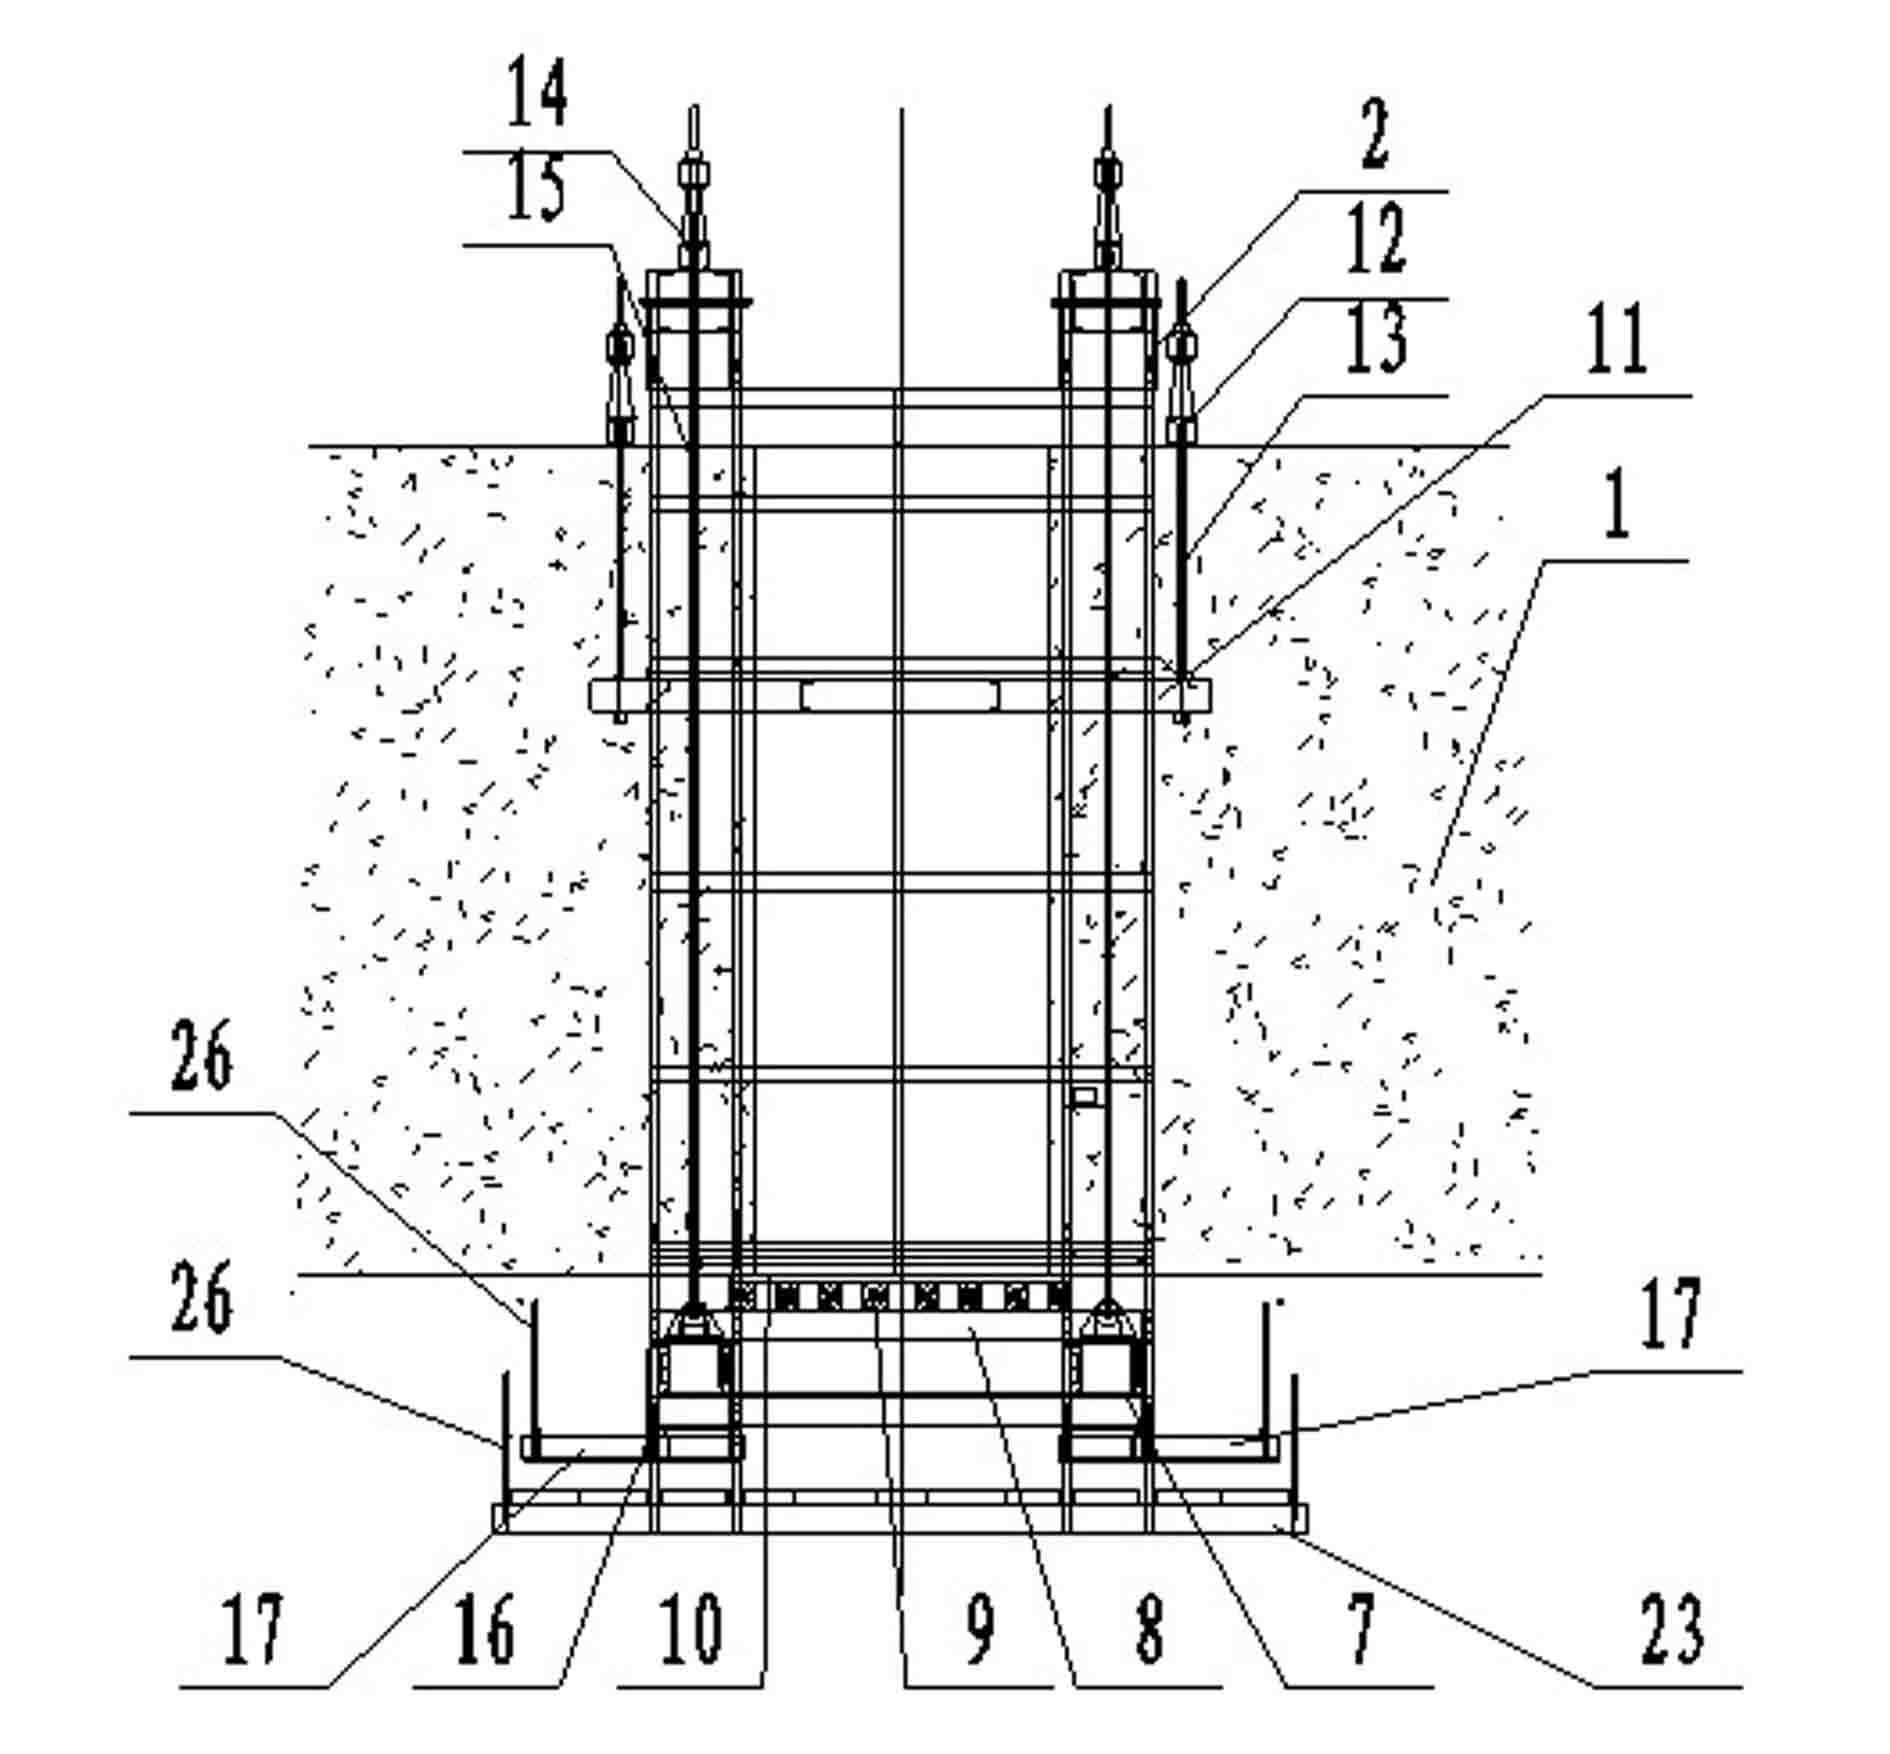 Hanging basket device for closure construction of continuous box girders